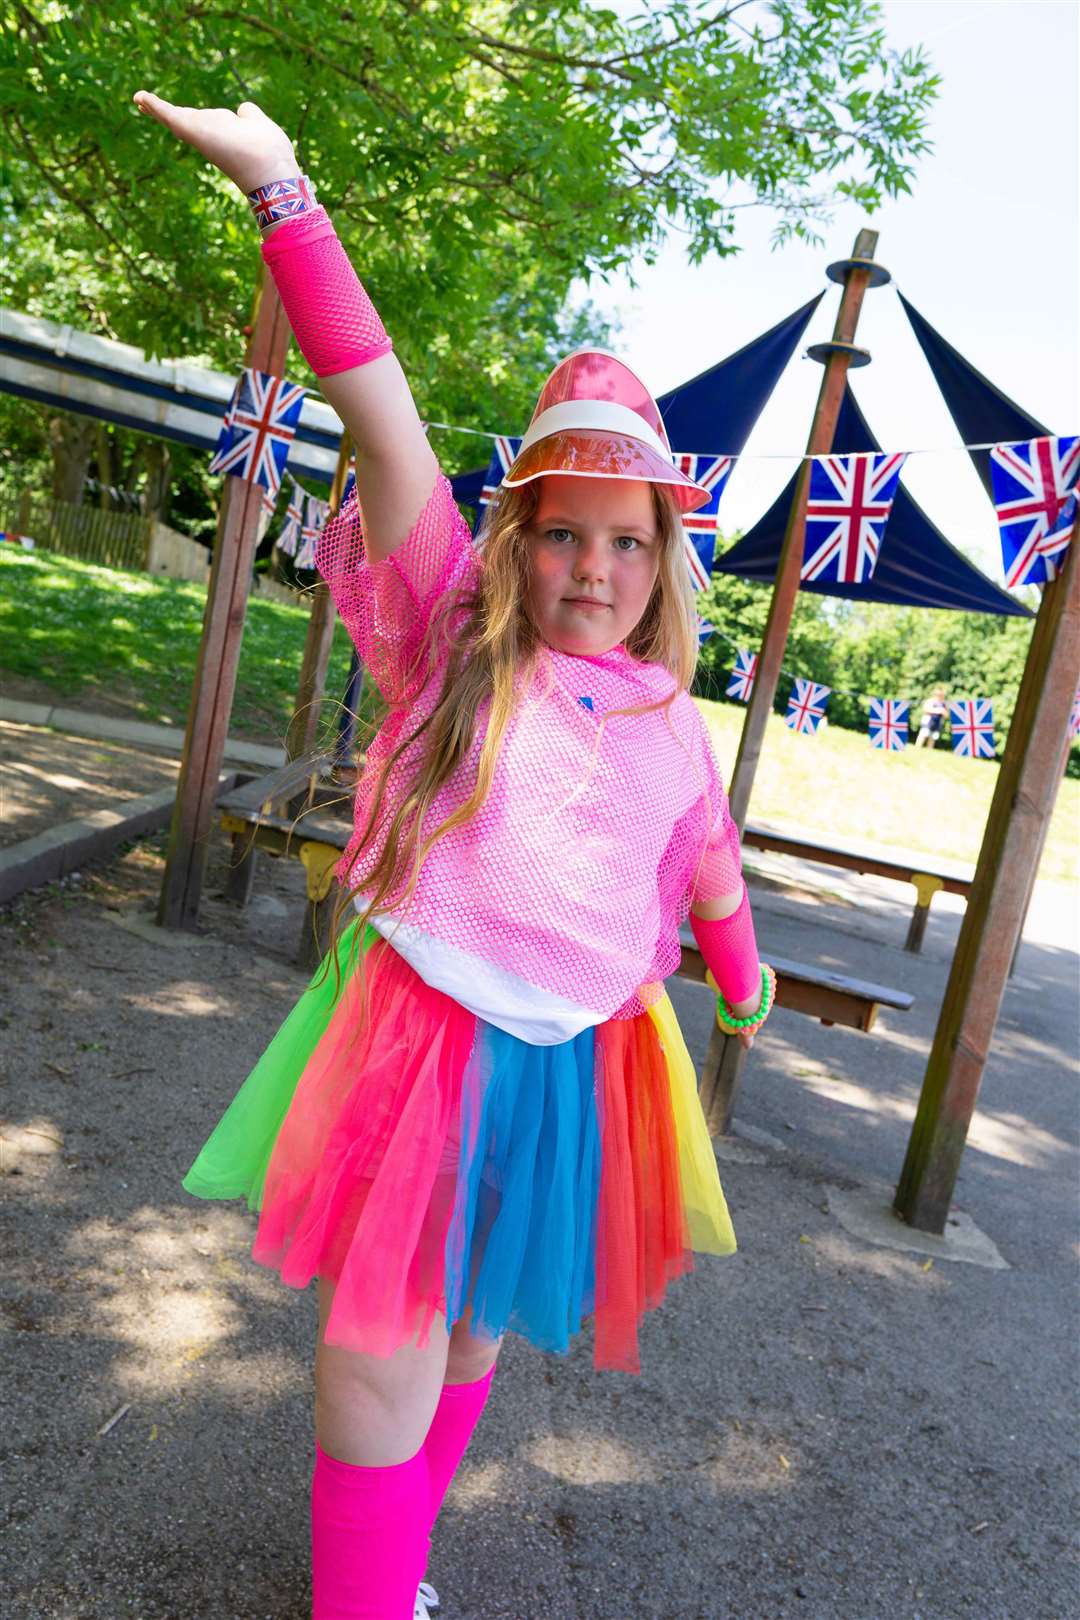 All in pink: Lena at Sunny Bank Primary School's Platinum Jubilee street party at Murston